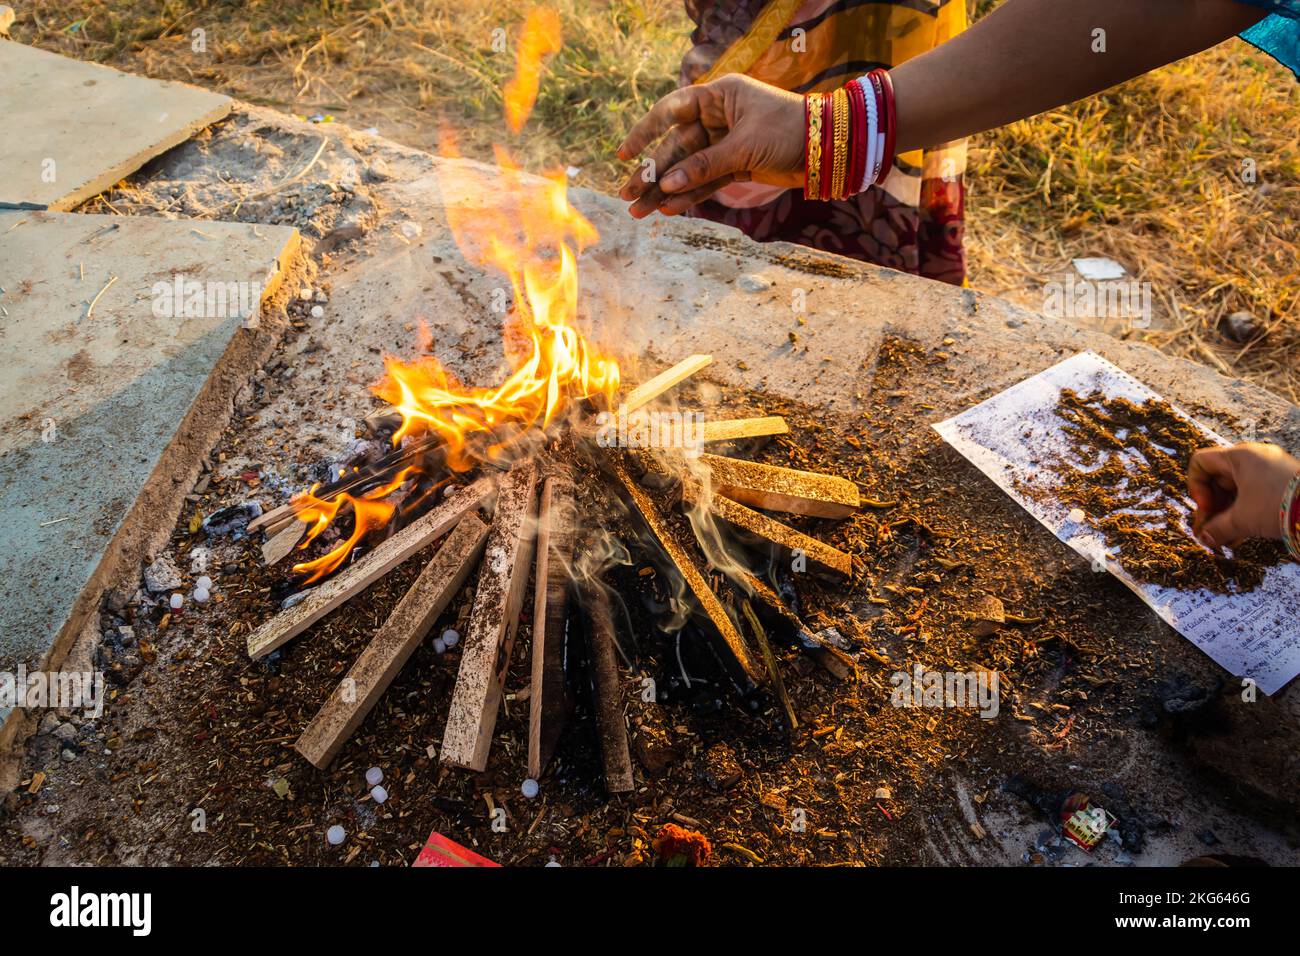 homa or havan in india for Hindu religious rituals for god during festival from different angle Stock Photo